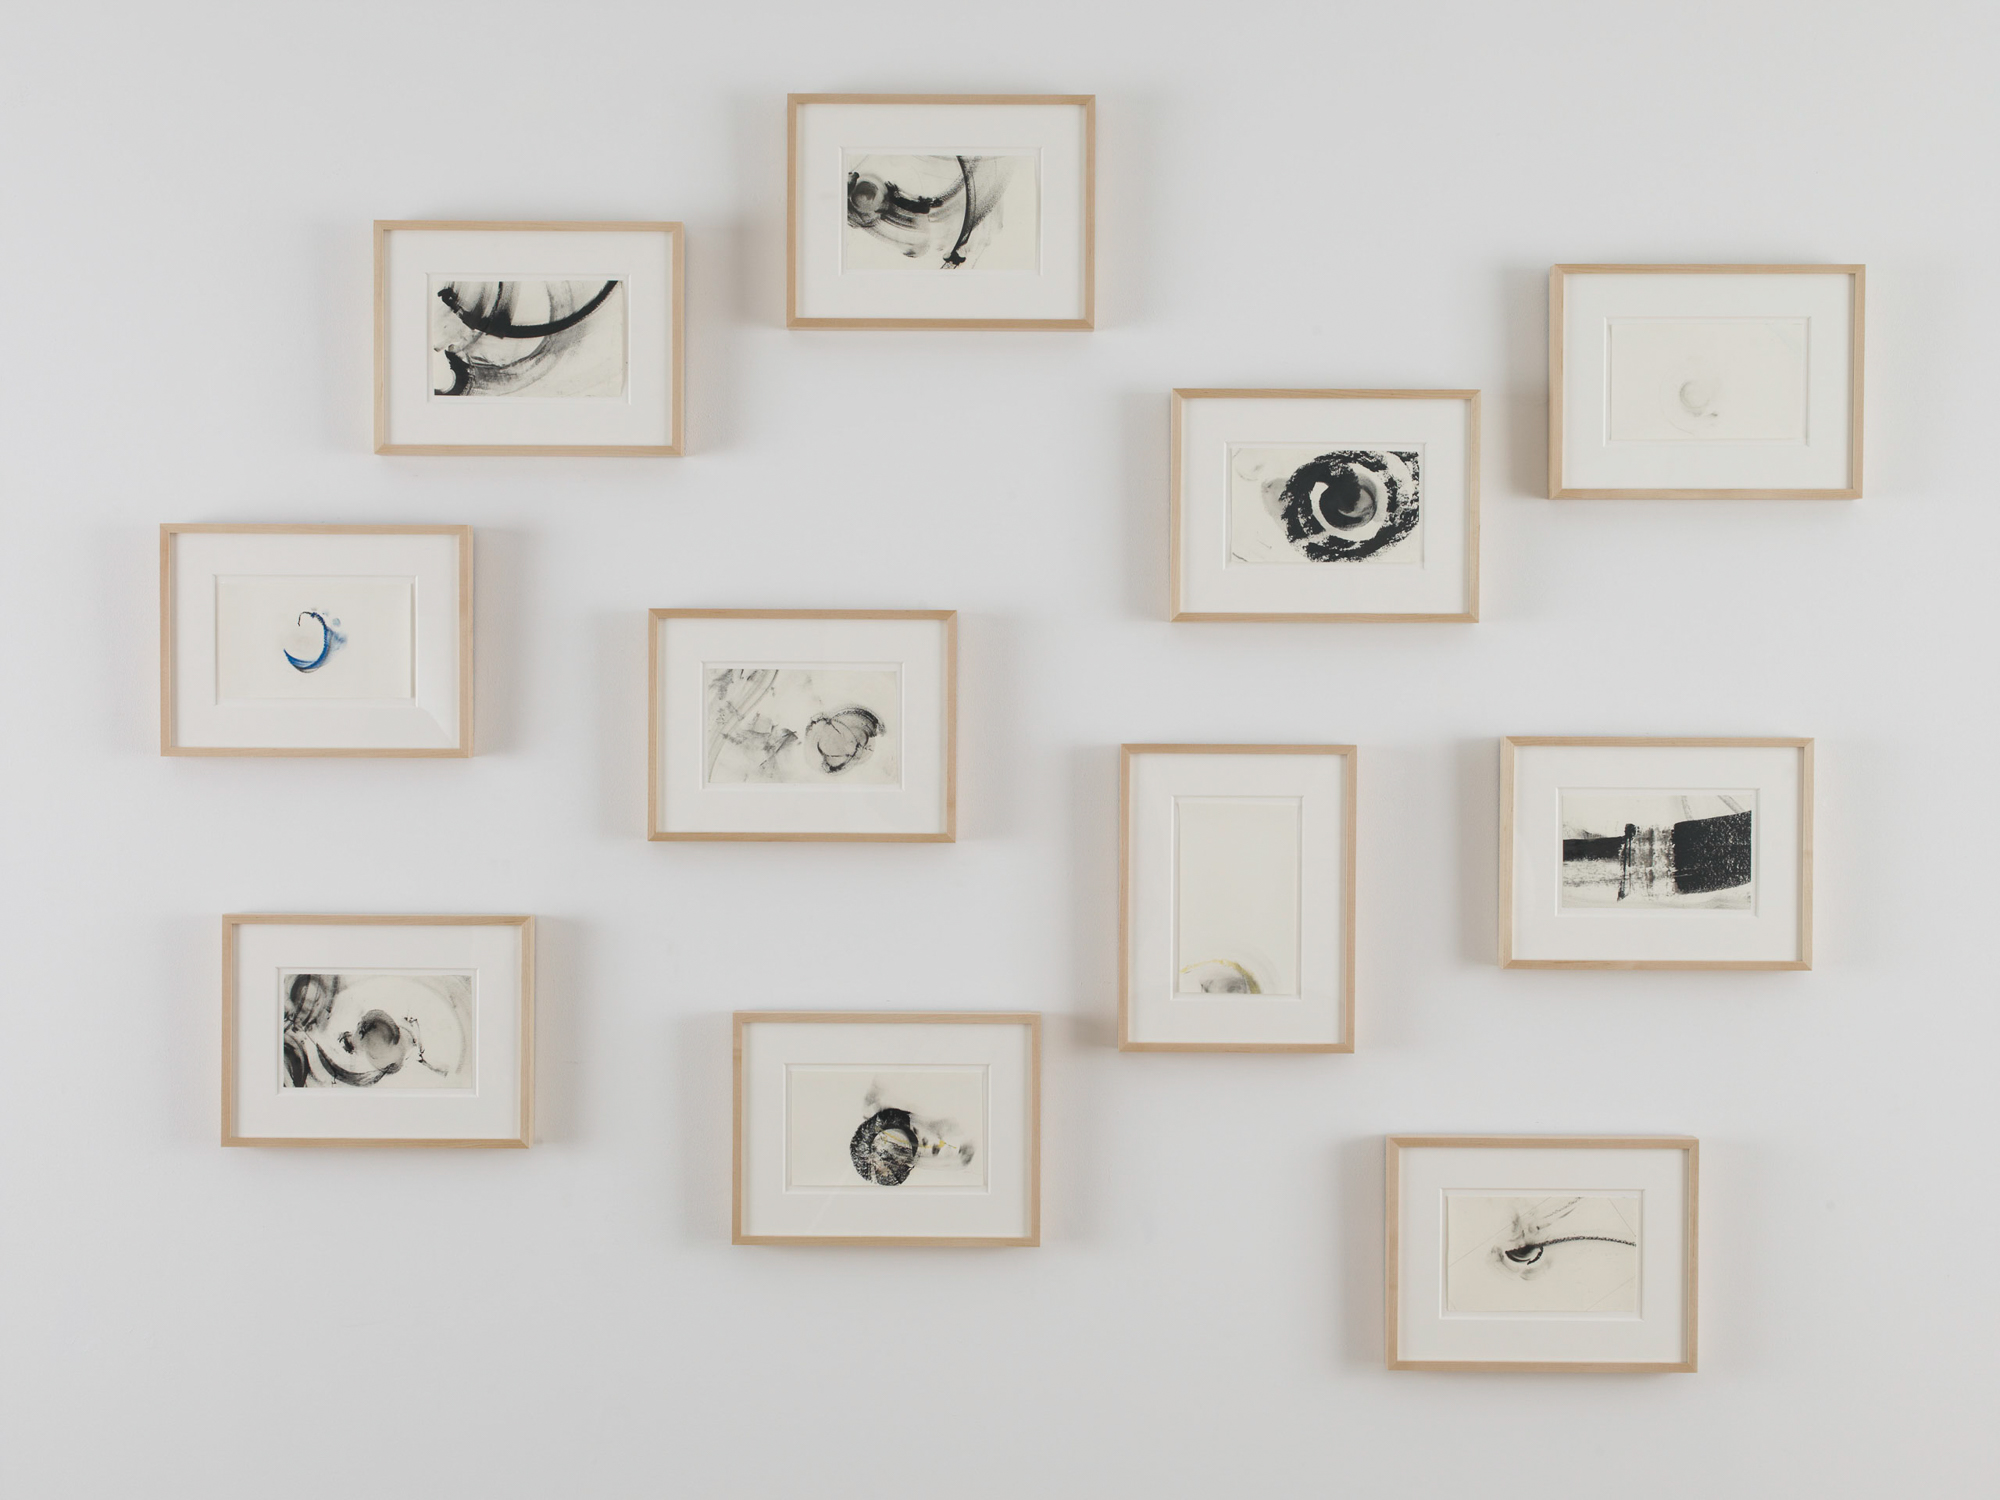 Trisha Brown Eleven Incidents, 2008 Charcoal on paper Set of 11 drawings:  6 x 10.125 inches (15.2 x 25.7 cm), each